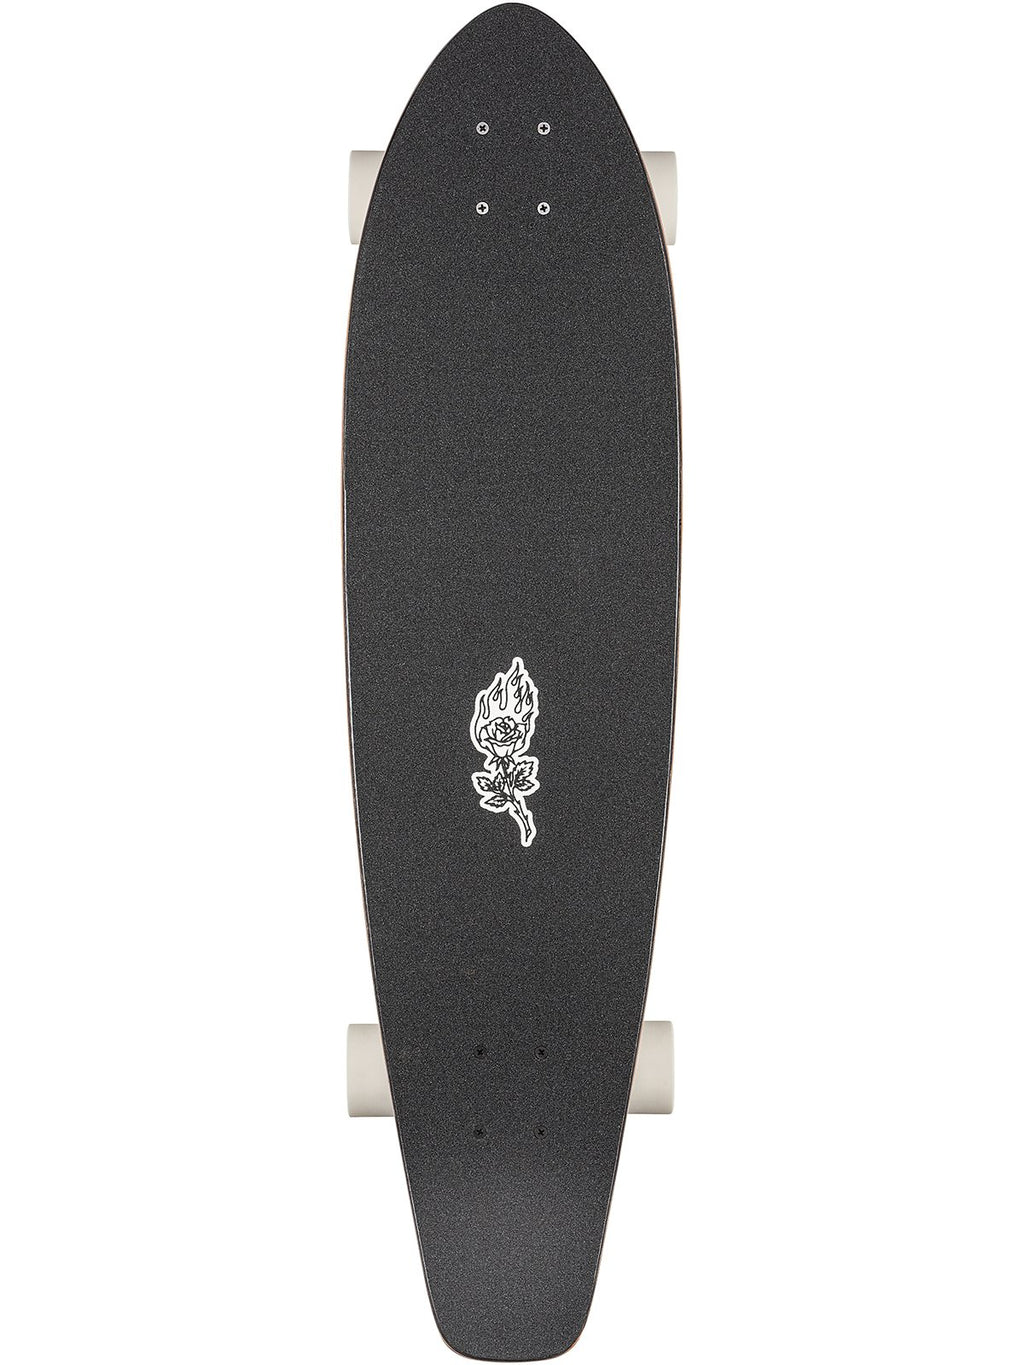 The All-Time Longboard Black Rose